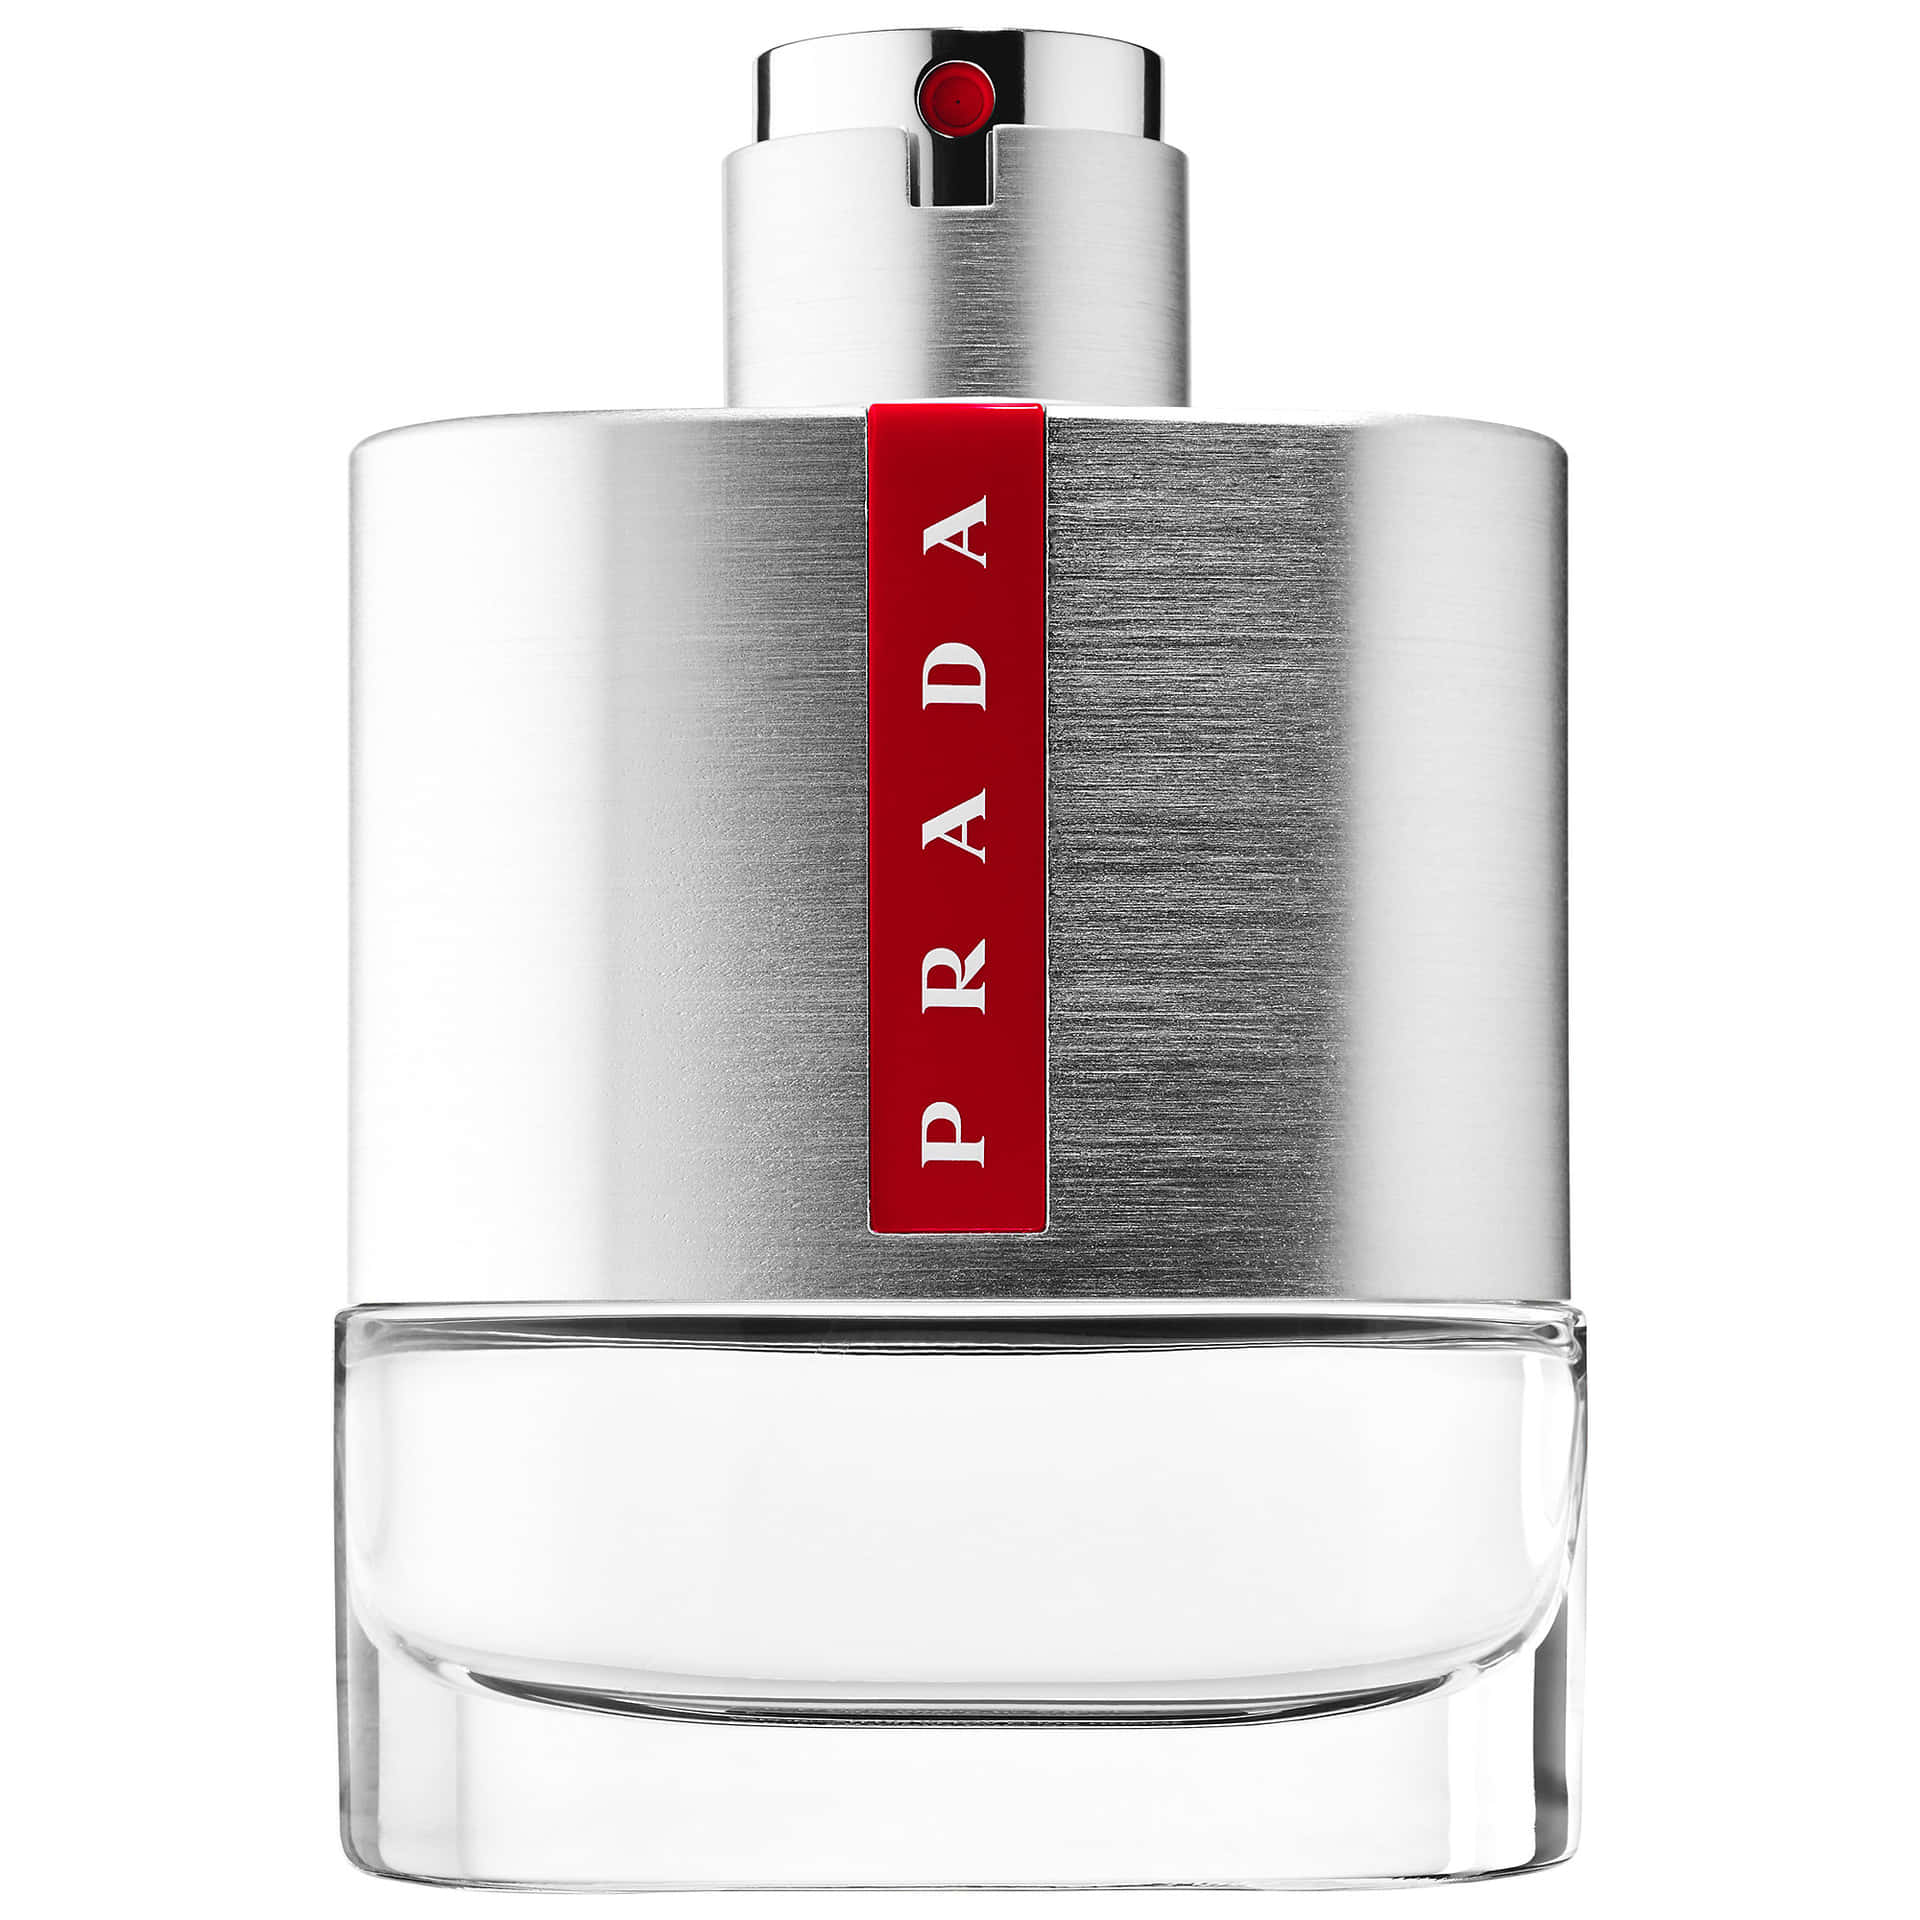 Welcome to the world of luxury with Prada